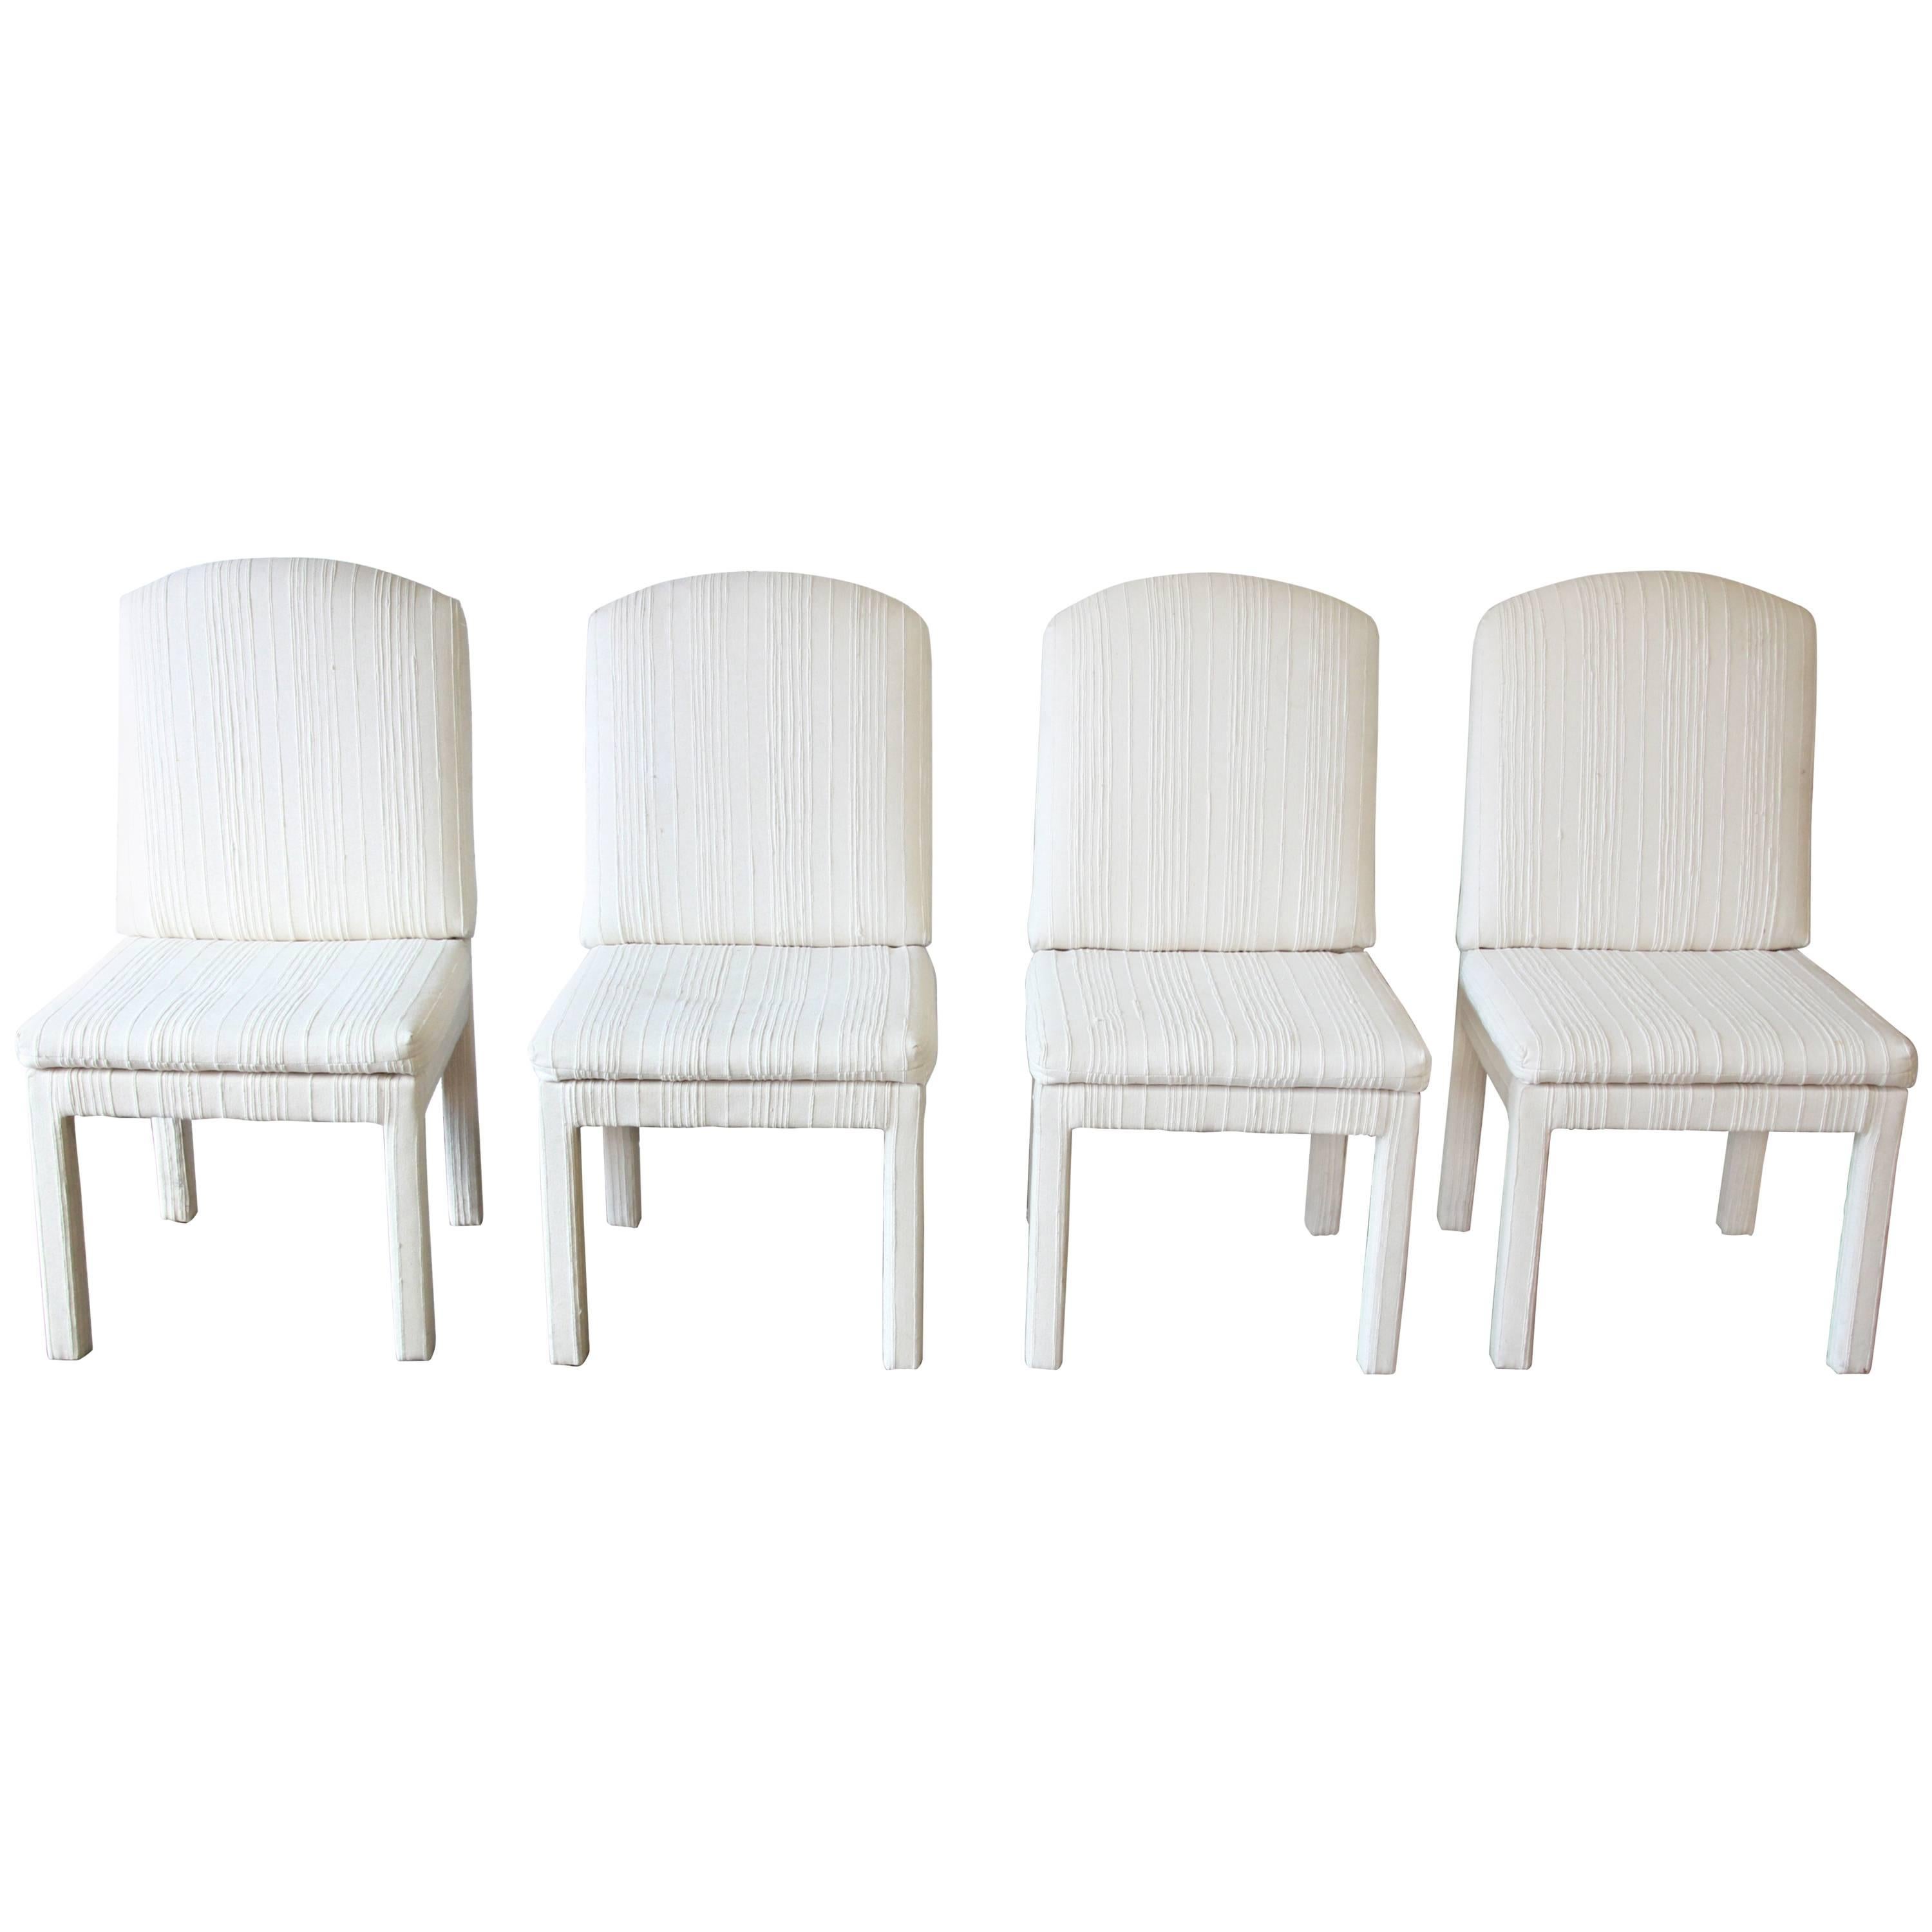 Four Milo Baughman Style Parsons Dining Chairs, Design Institute of America